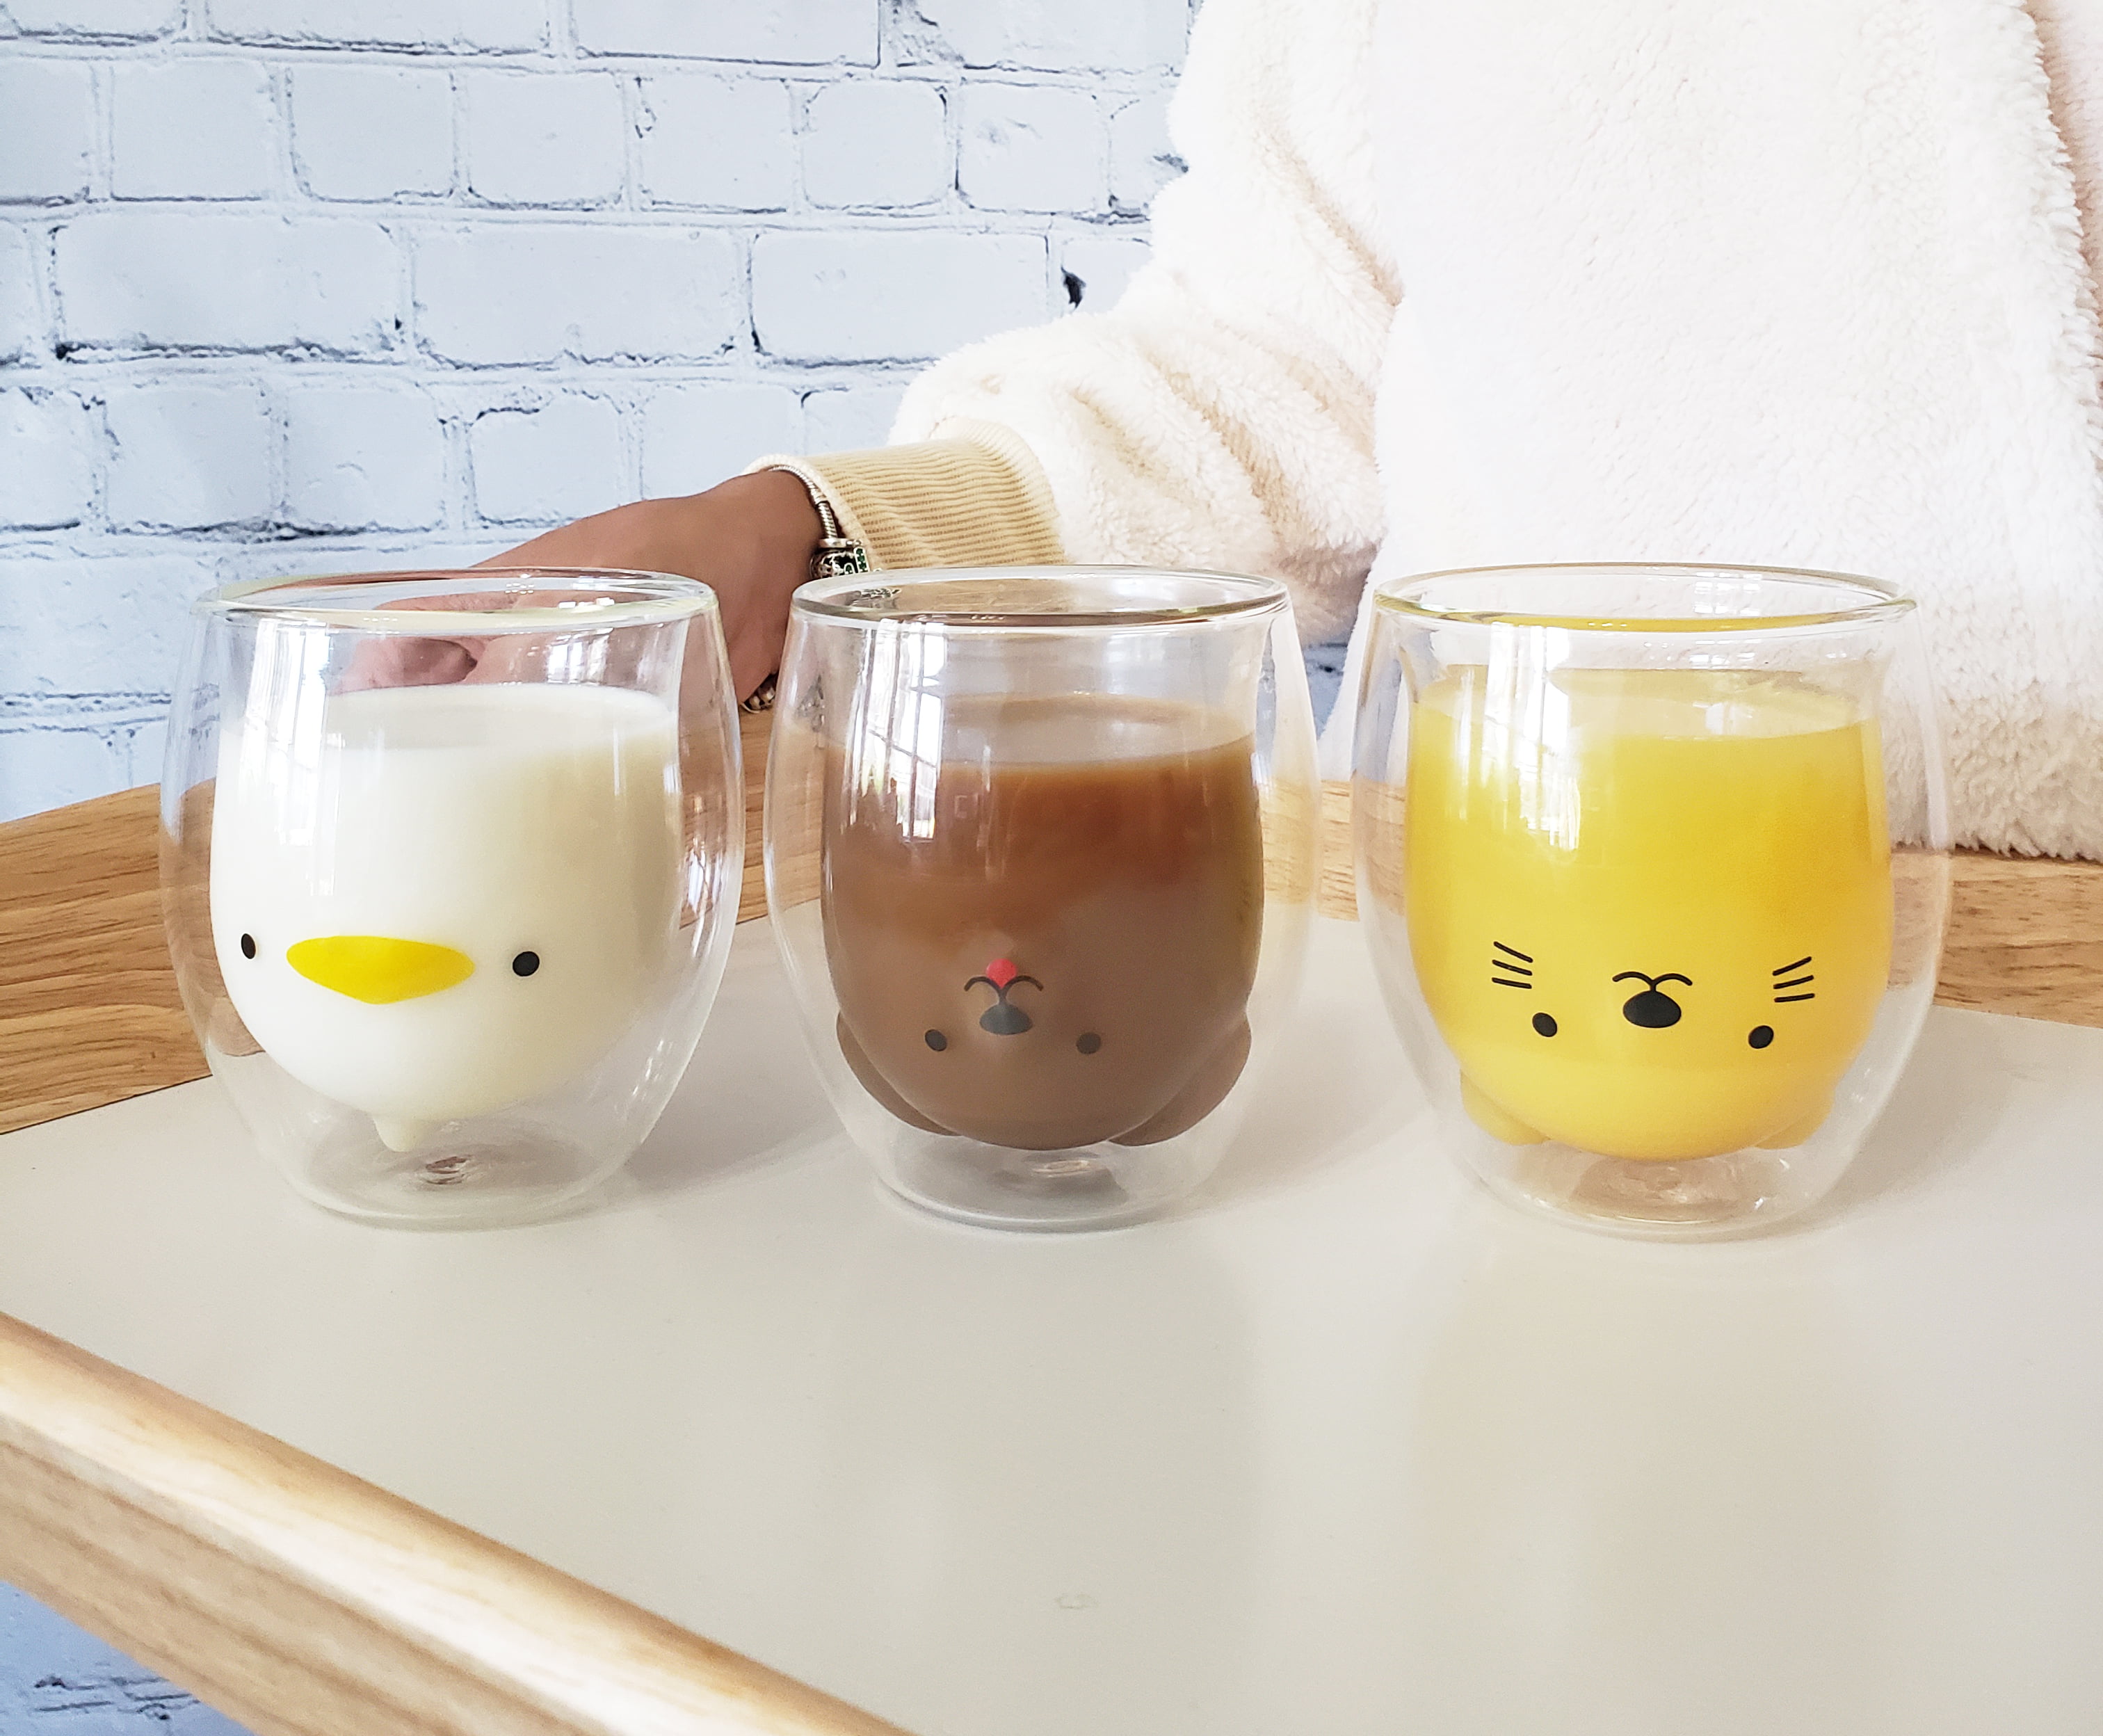 SHENDONG Cute Cat Mugs with Handle Cute Cups Cat Tea Coffee Cup Double Wall  Insulated Glass Espresso…See more SHENDONG Cute Cat Mugs with Handle Cute